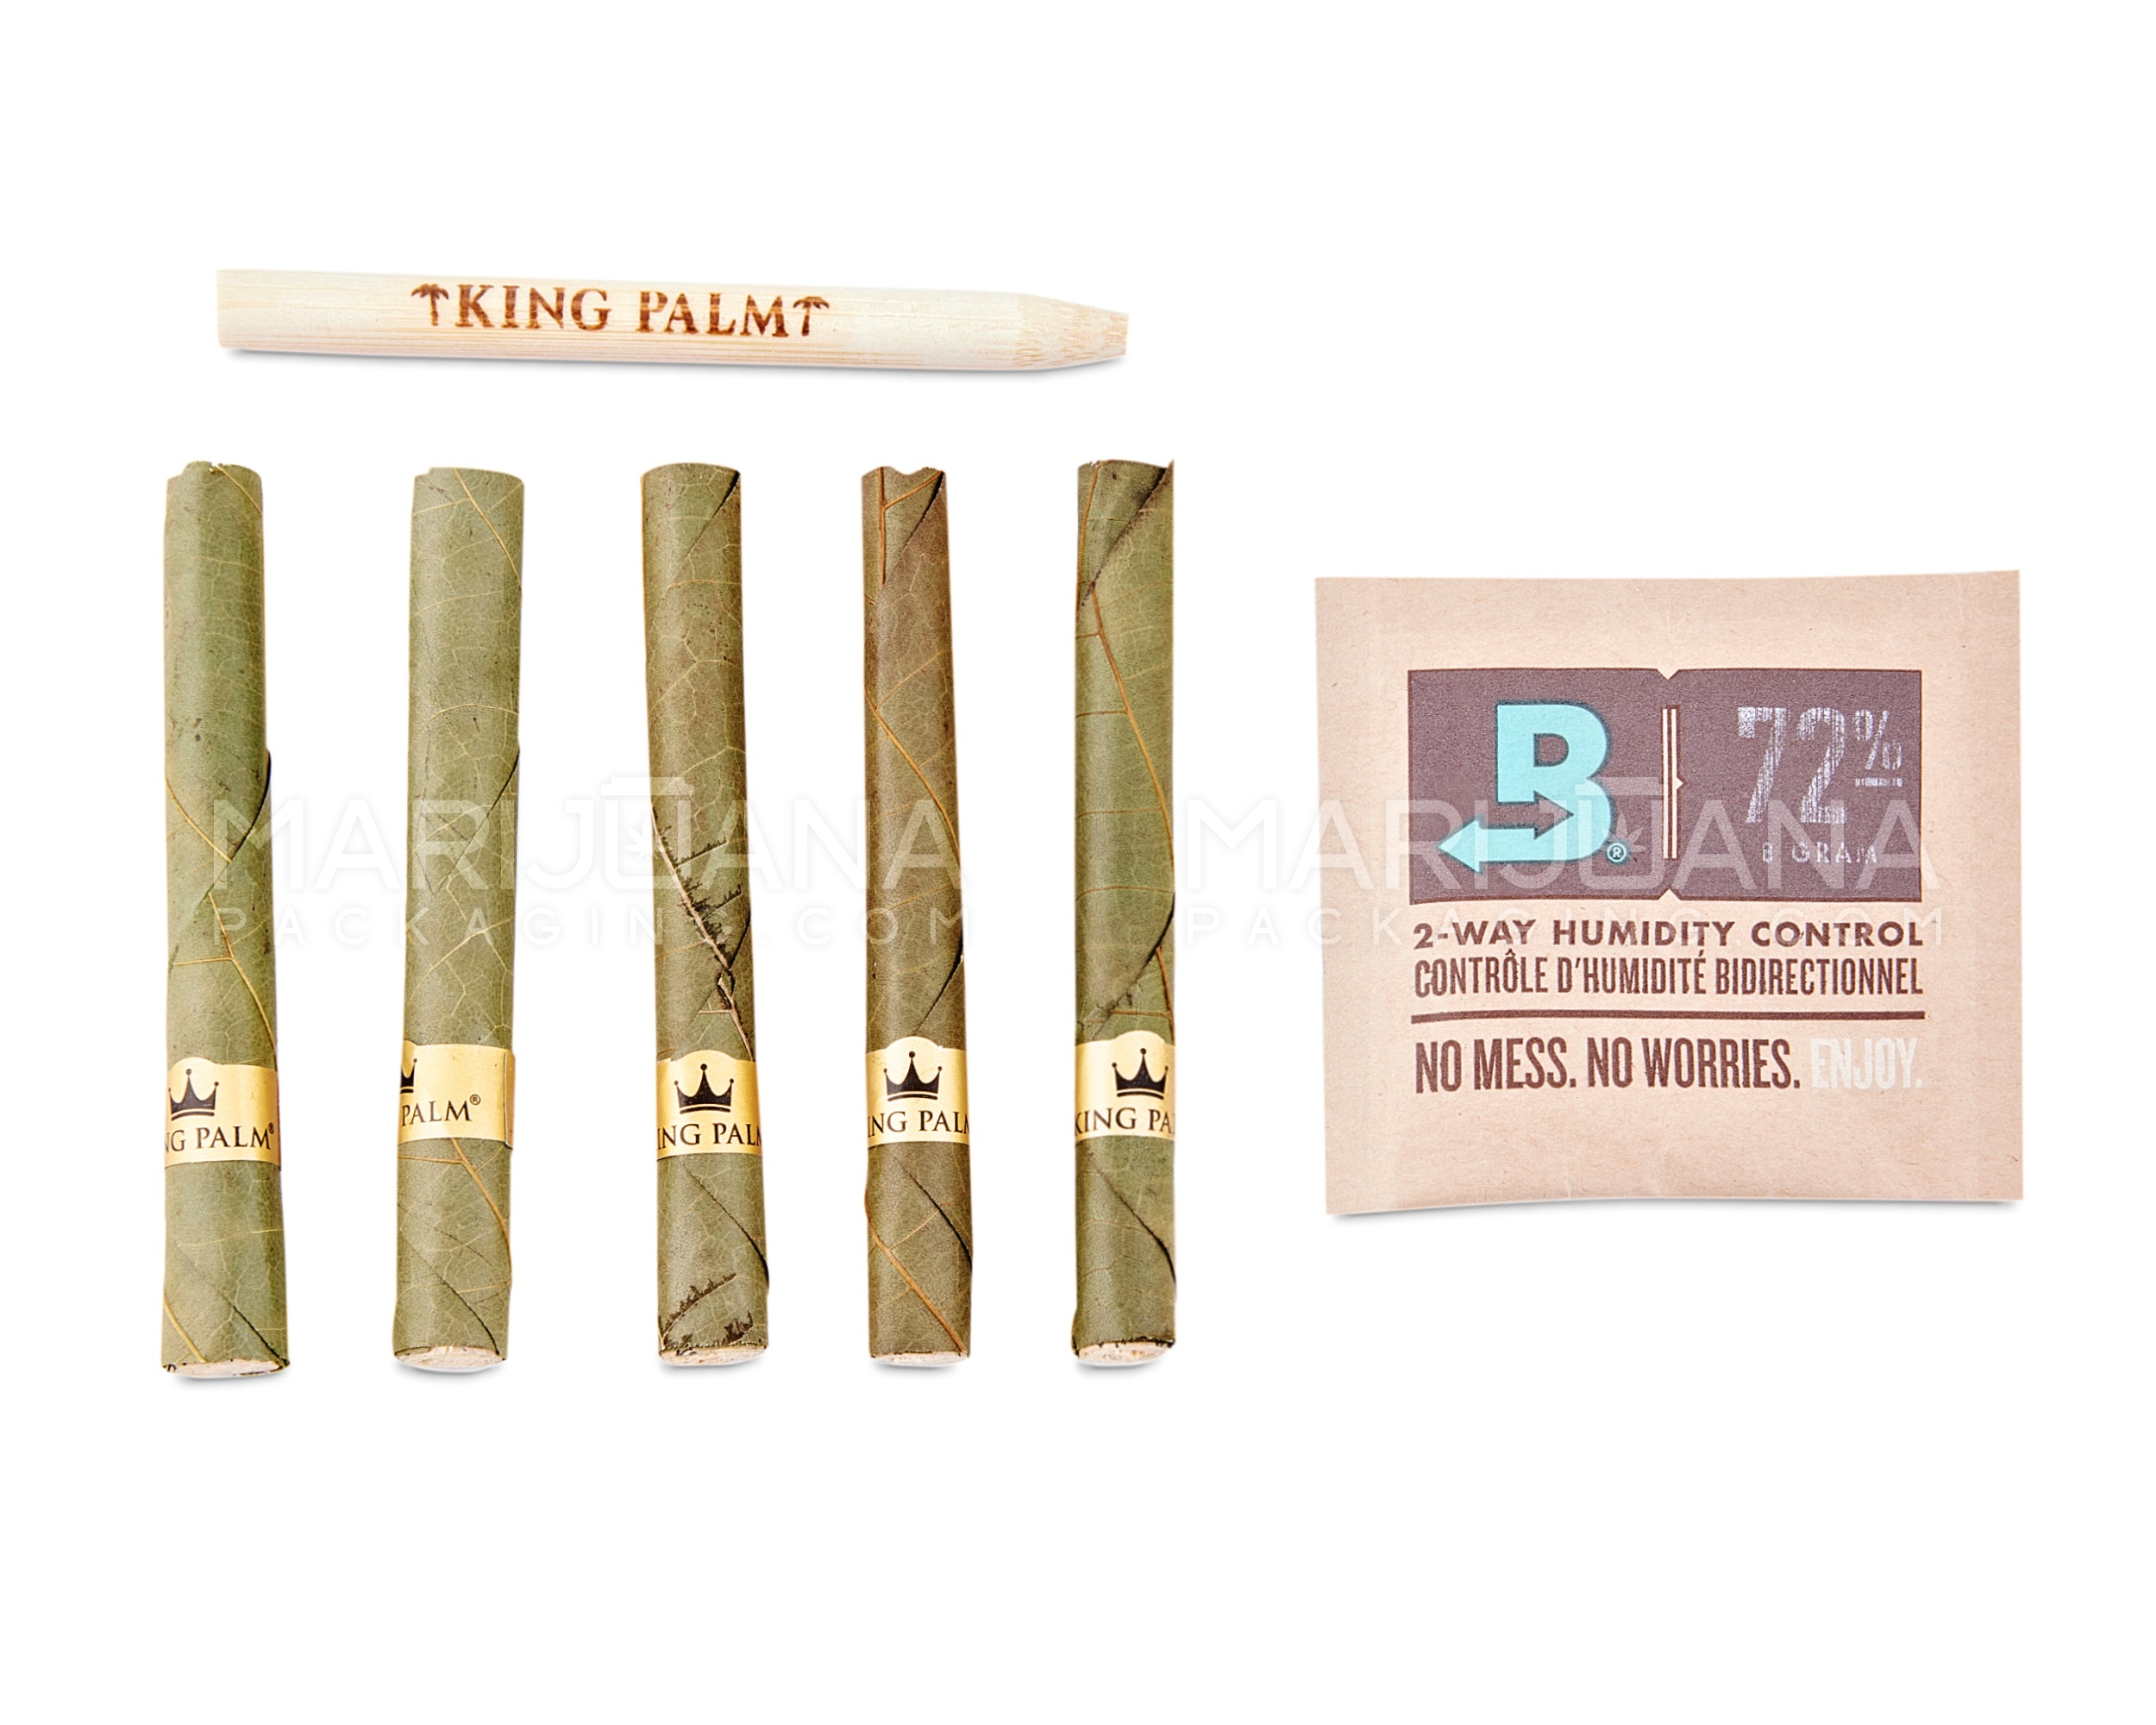 KING PALM | 'Retail Display' Mini Green Natural Leaf Blunt Wraps | 84mm - Berry Terps - 15 Count - 5